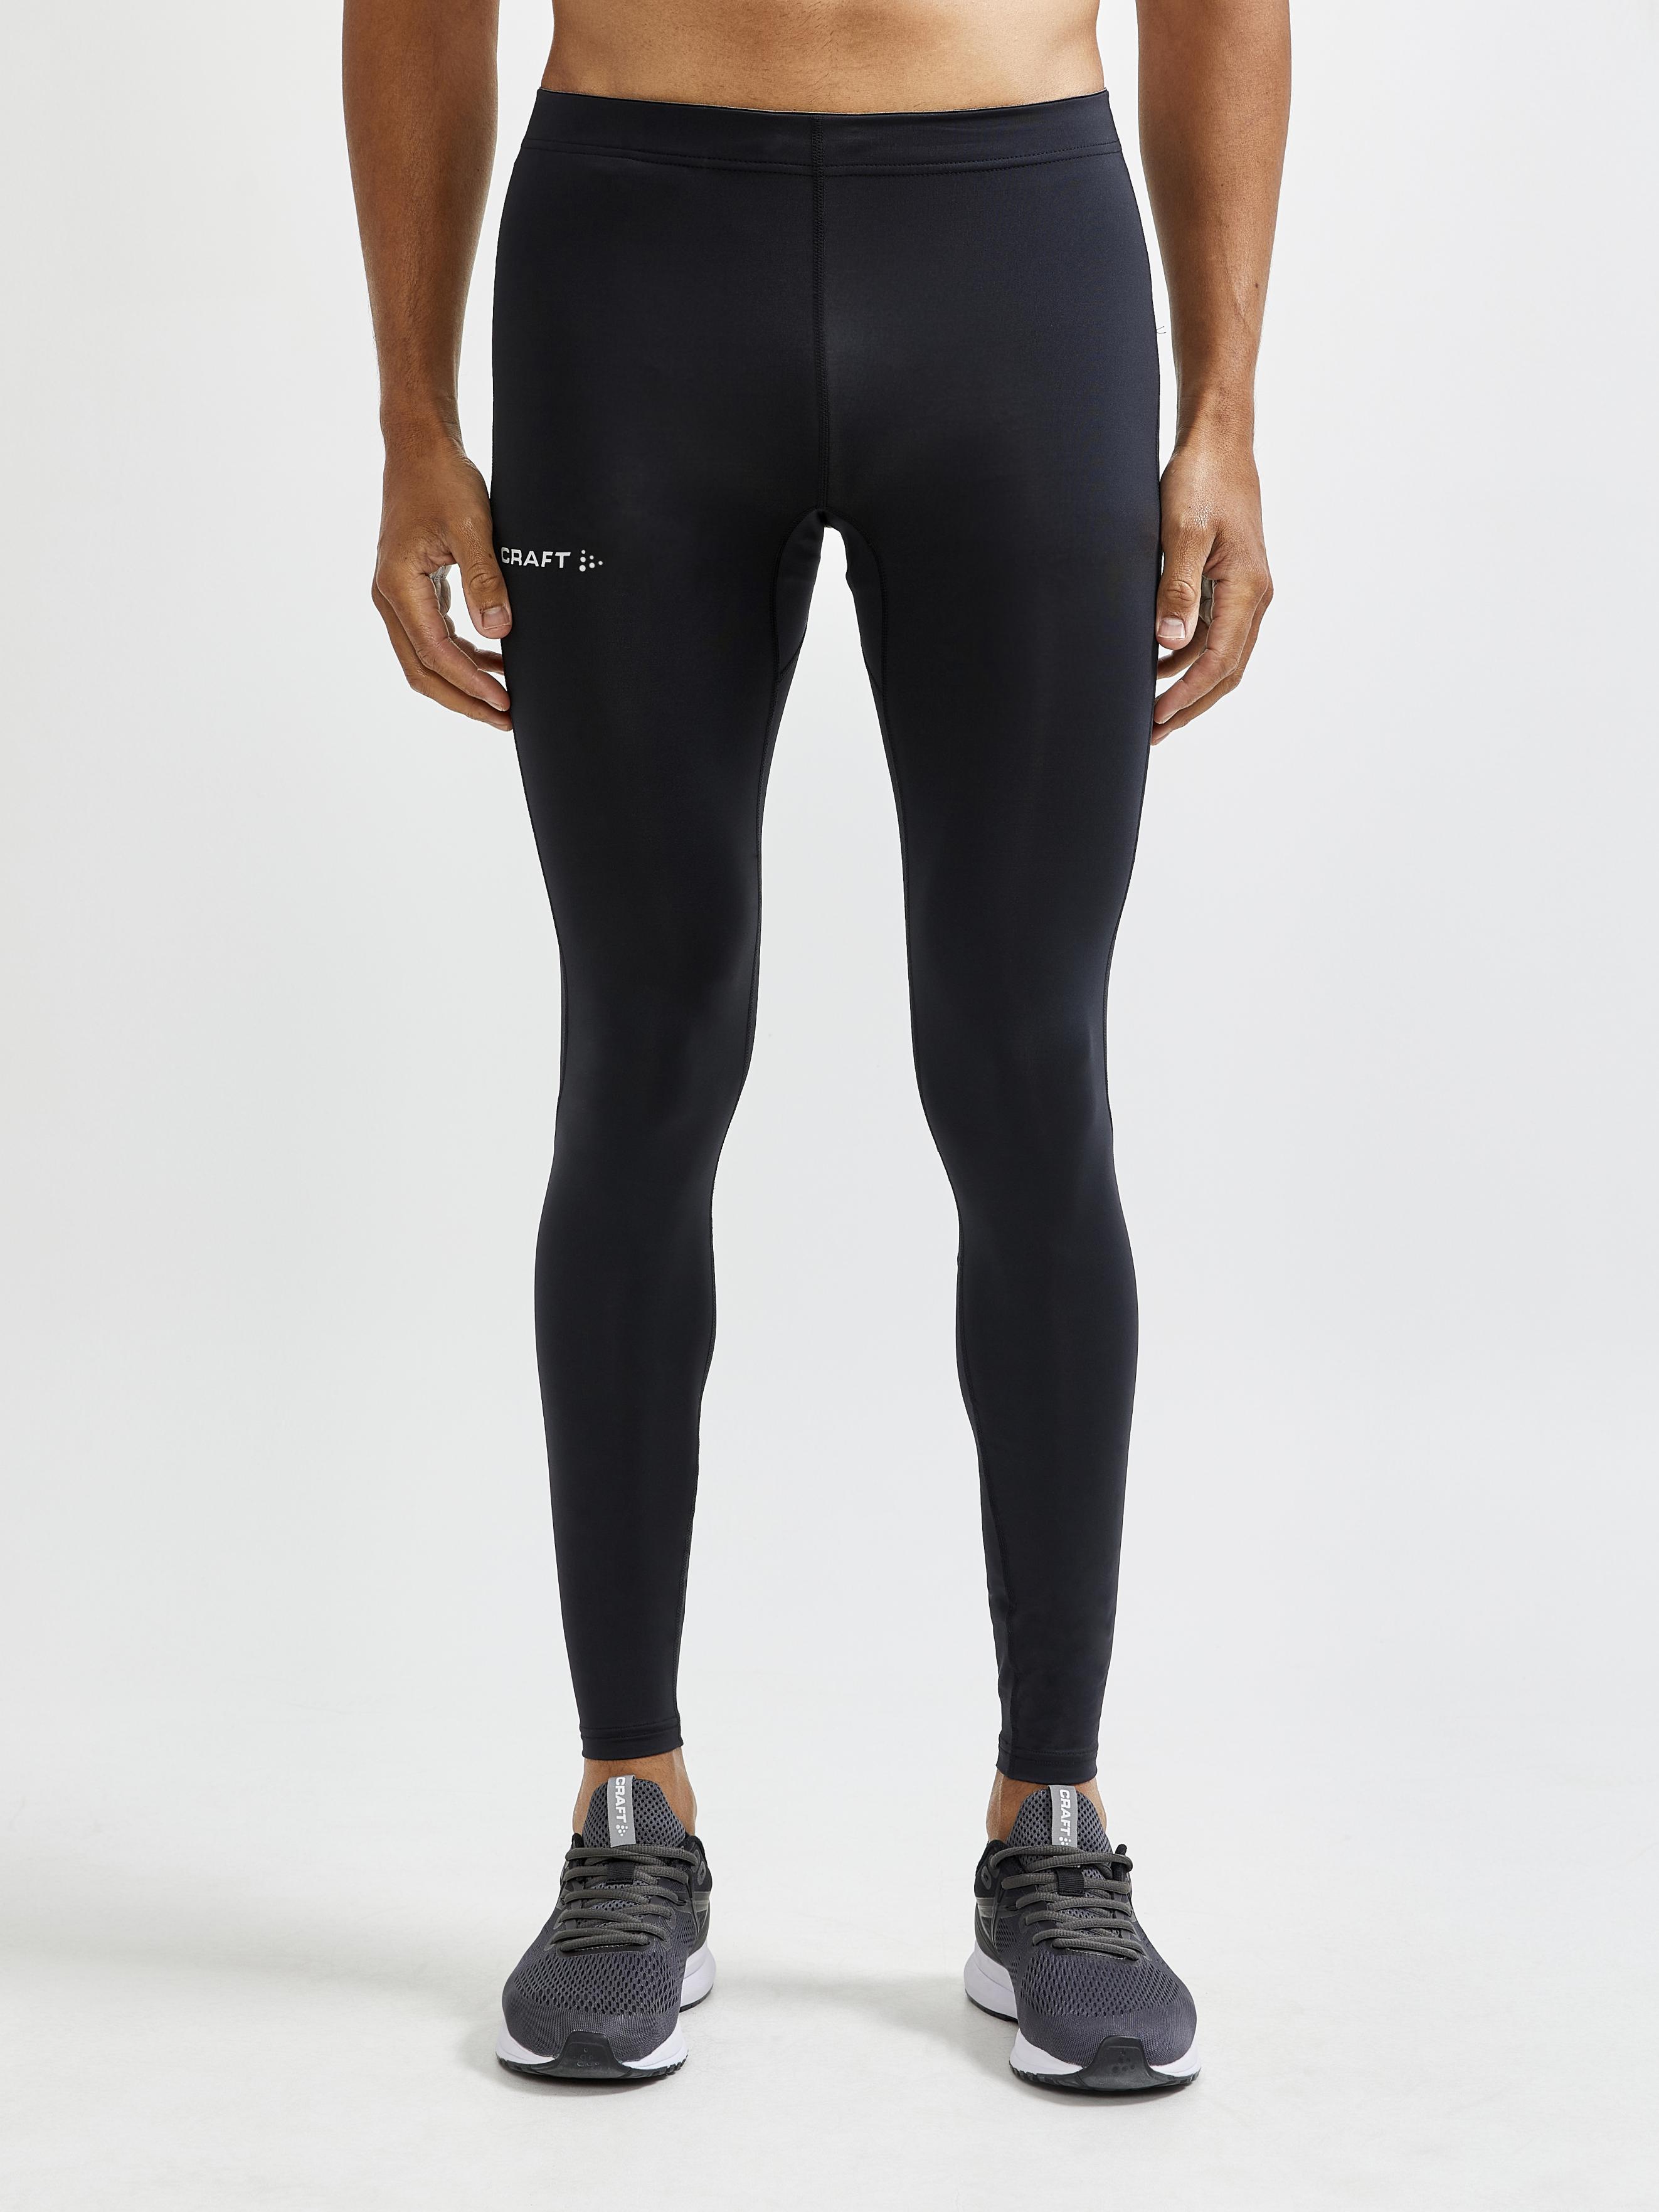 Men's Sports Leggings / Sports Tights Super Sale up to −50